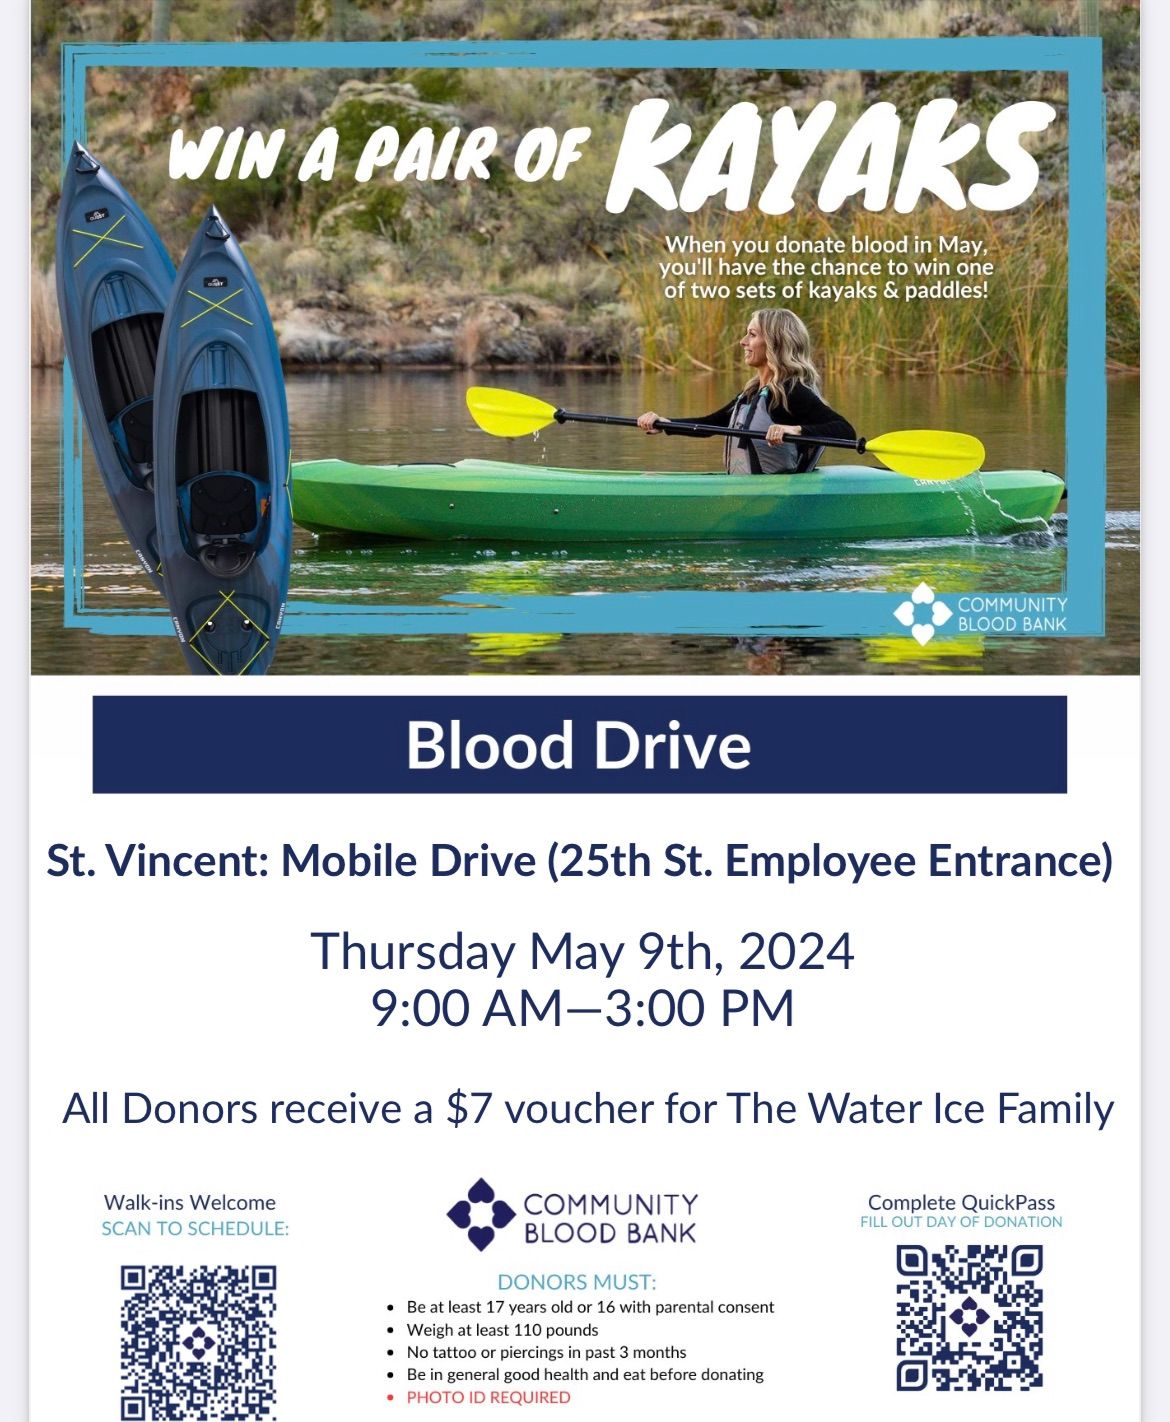 Blood drive at ST. Vincent Hospital with COMMUNITY BLOOD BANK 